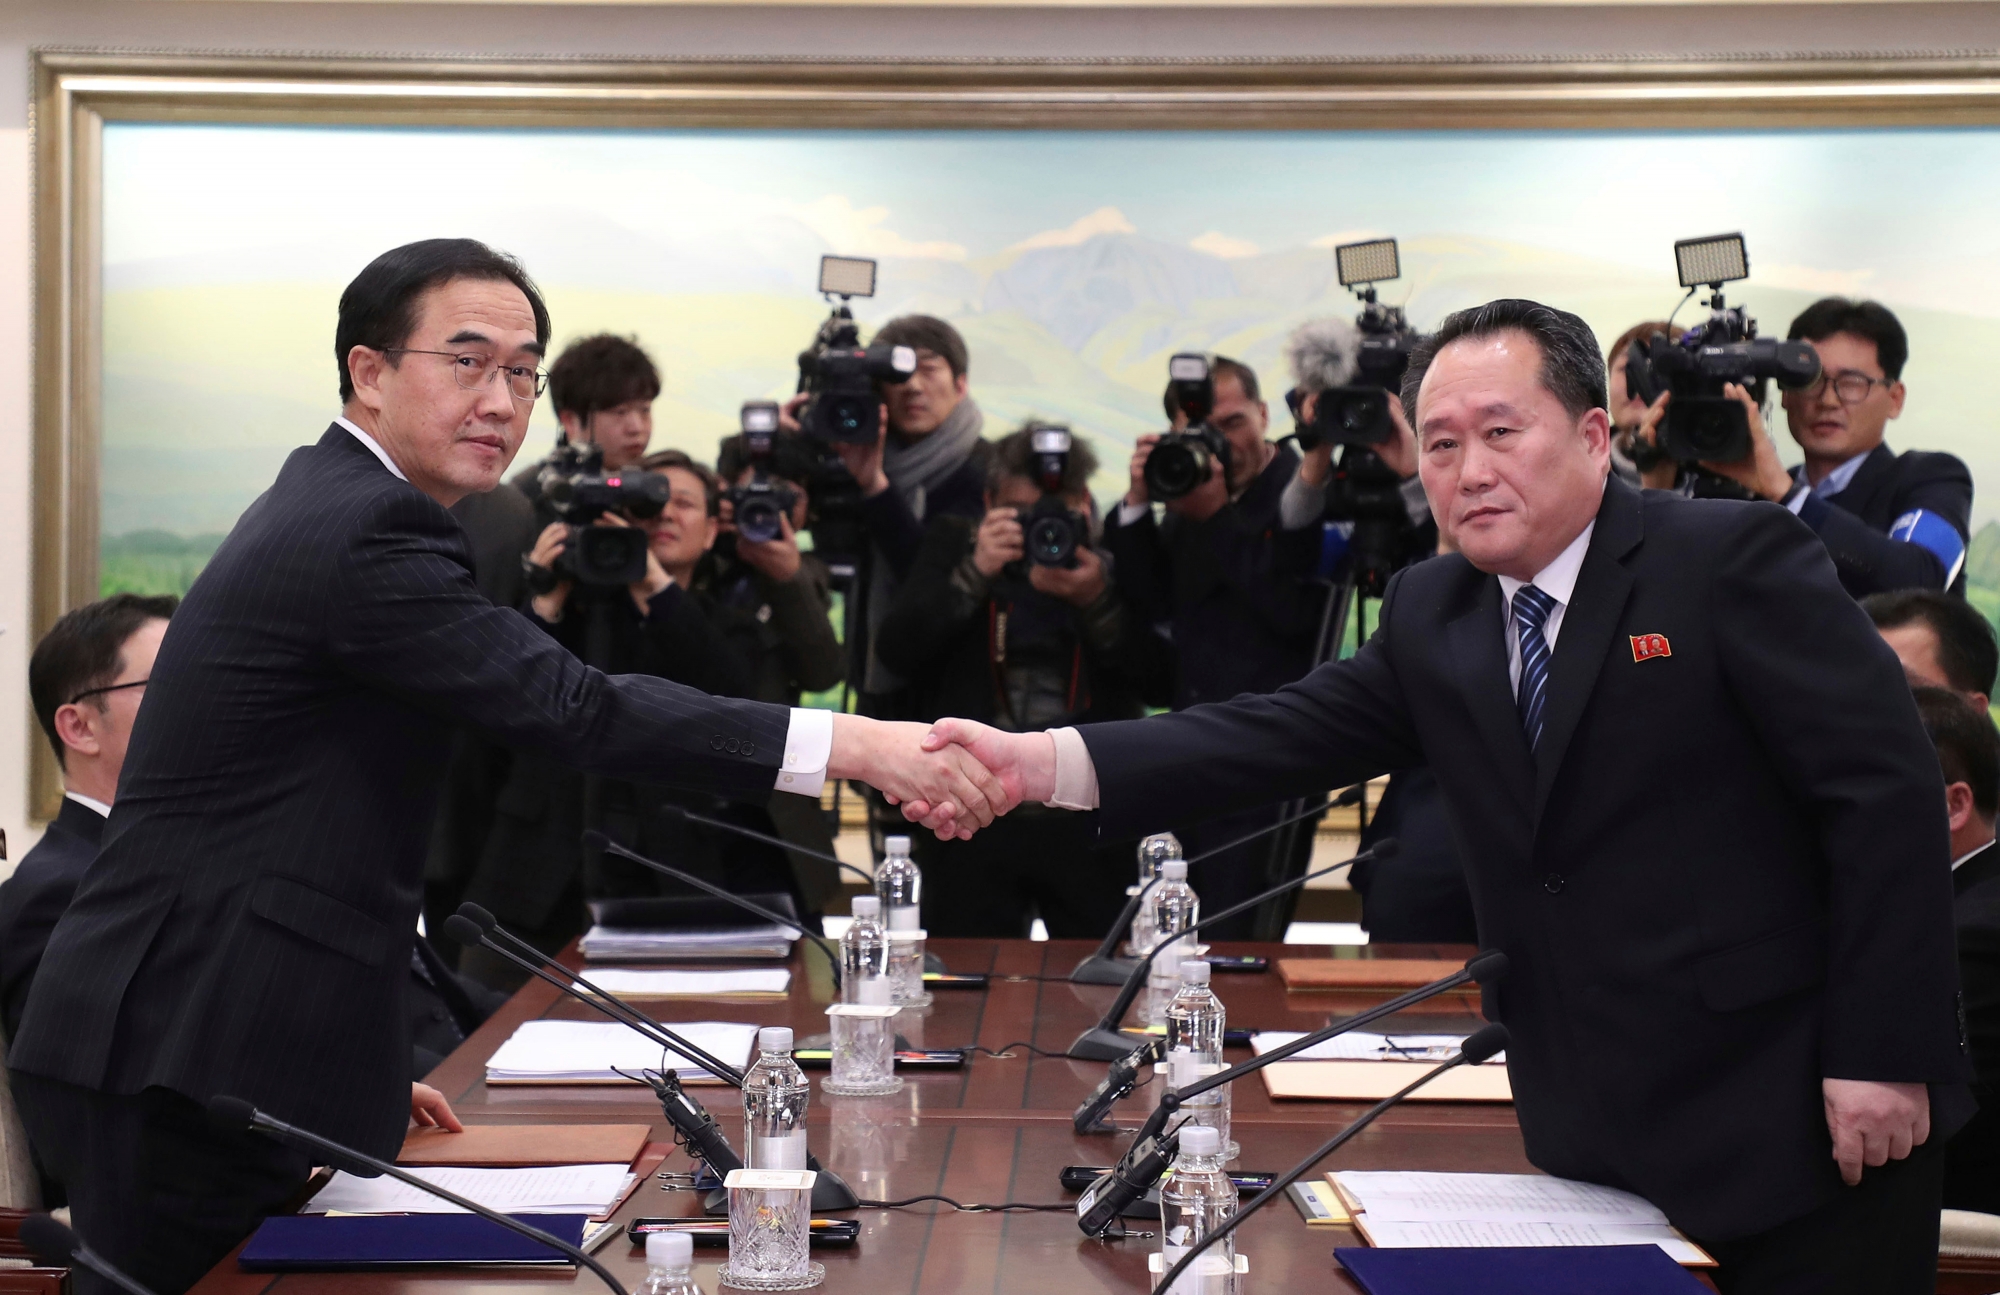 The head of the North Korean delegation Ri Son Gwon, right, shakes hands with South Korean Unification Minister Cho Myoung-gyon after their meeting at Panmunjom in the Demilitarized Zone in Paju, South Korea, Tuesday, Jan. 9, 2018. The rival Koreas took steps toward reducing their bitter animosity during rare talks Tuesday, as North Korea agreed to send a delegation to next month's Winter Olympics in South Korea and reopen a military hotline. (Korea Pool/Yonhap via AP) South Korea Koreas Tensions